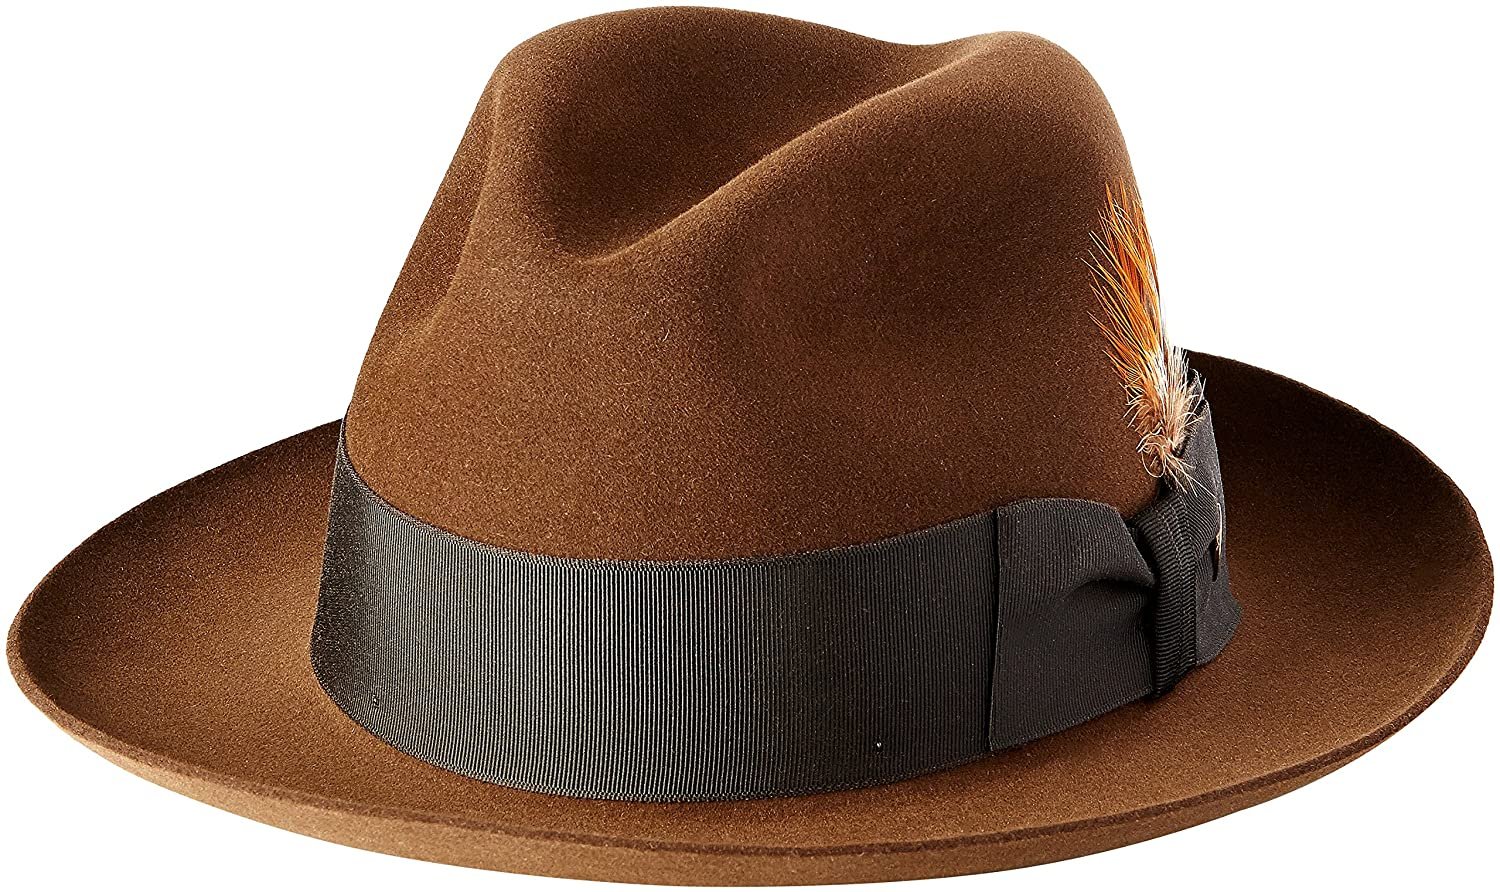 STETSON Temple Fur Felt Fedora Premium Royal Deluxe Hat Sovereign 100/% Wool STF6